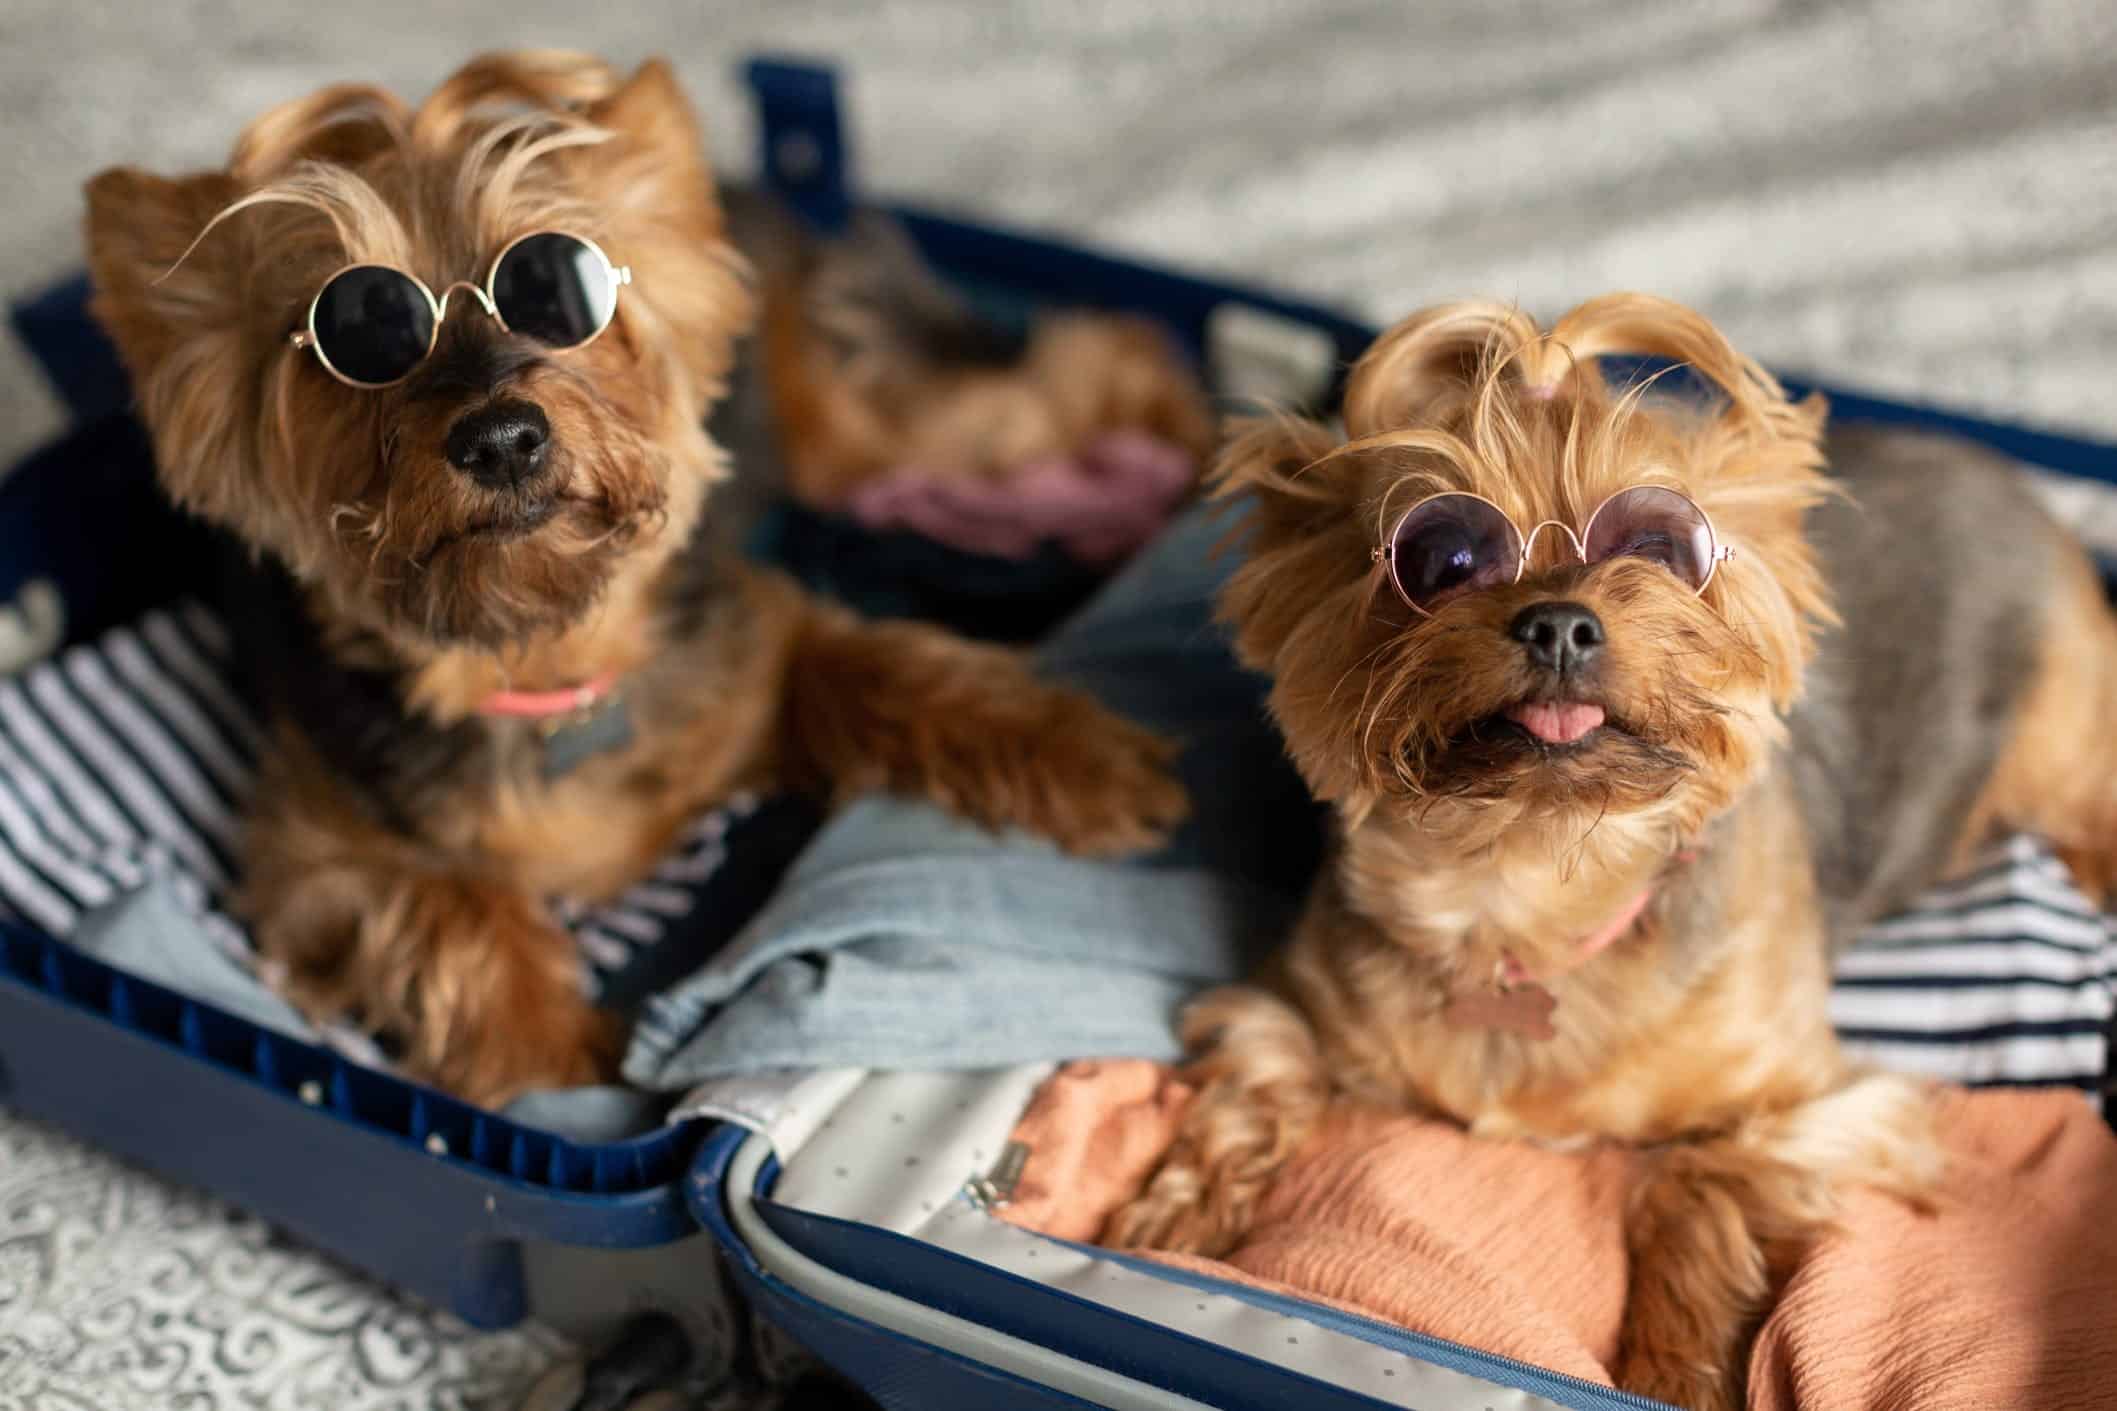 Two Yorkshire Terrier dogs in mini sunglasses sitting in a suitcase